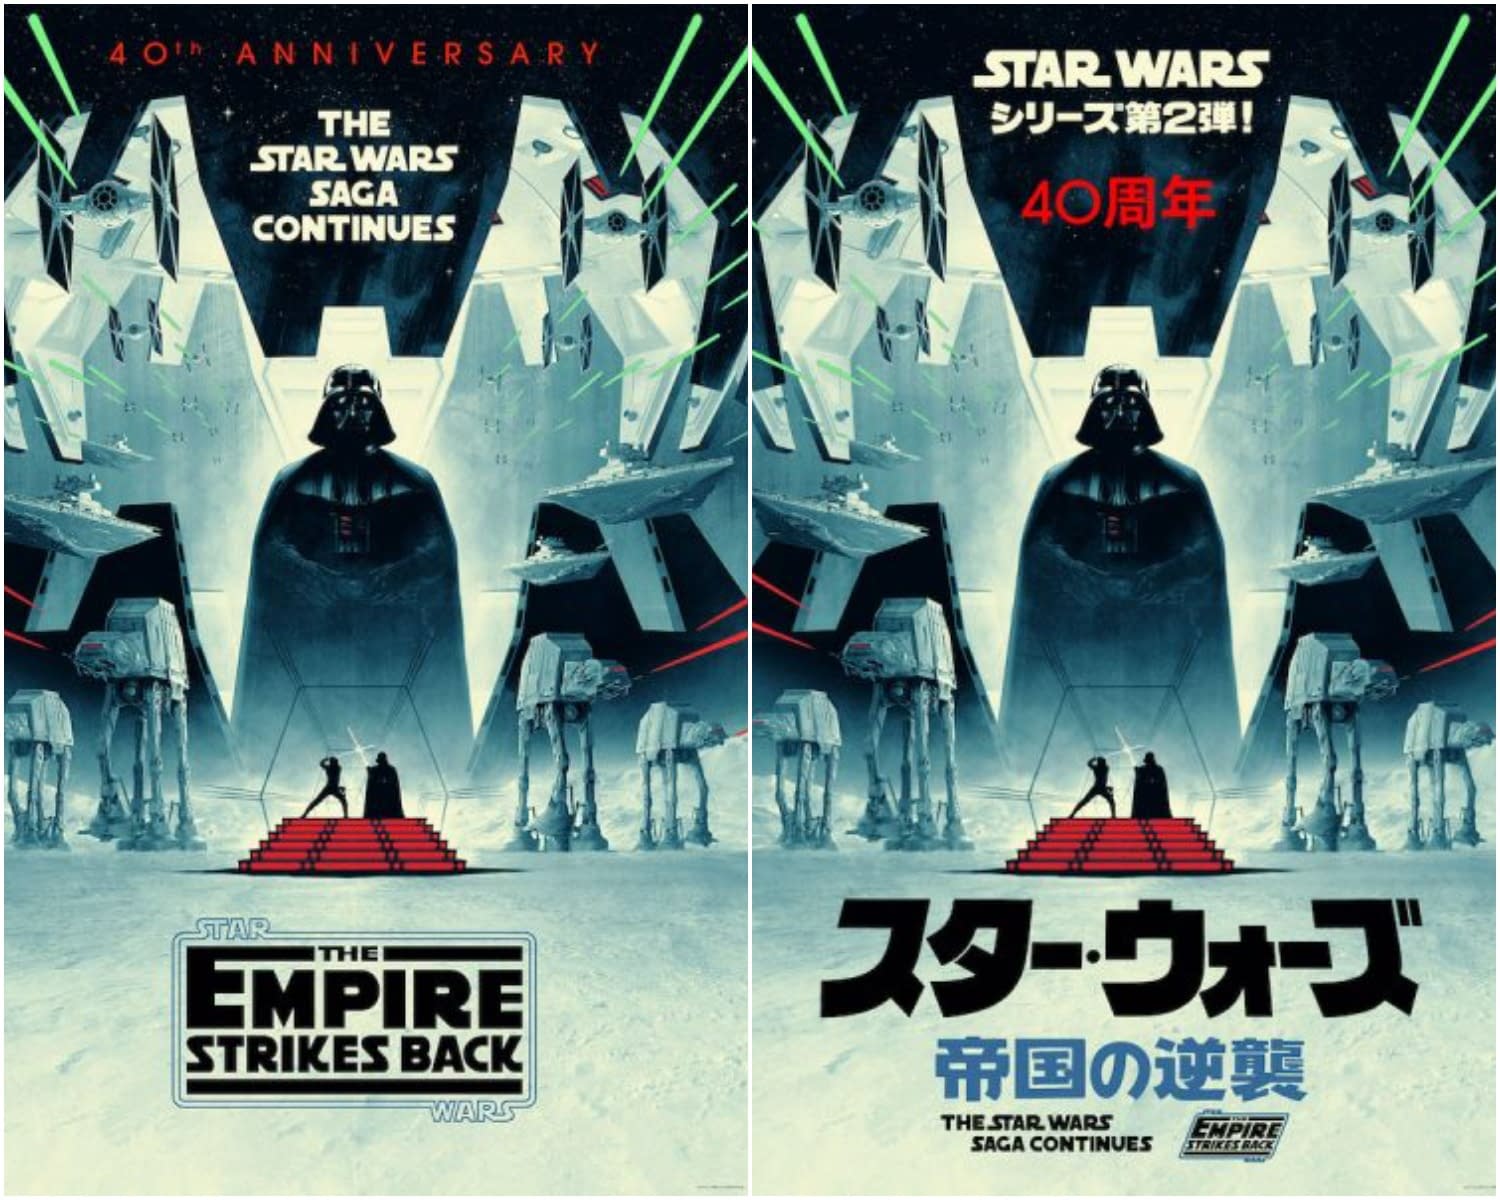 Star Wars: Empire Strikes Back 40th Anniversary Posters Available Now